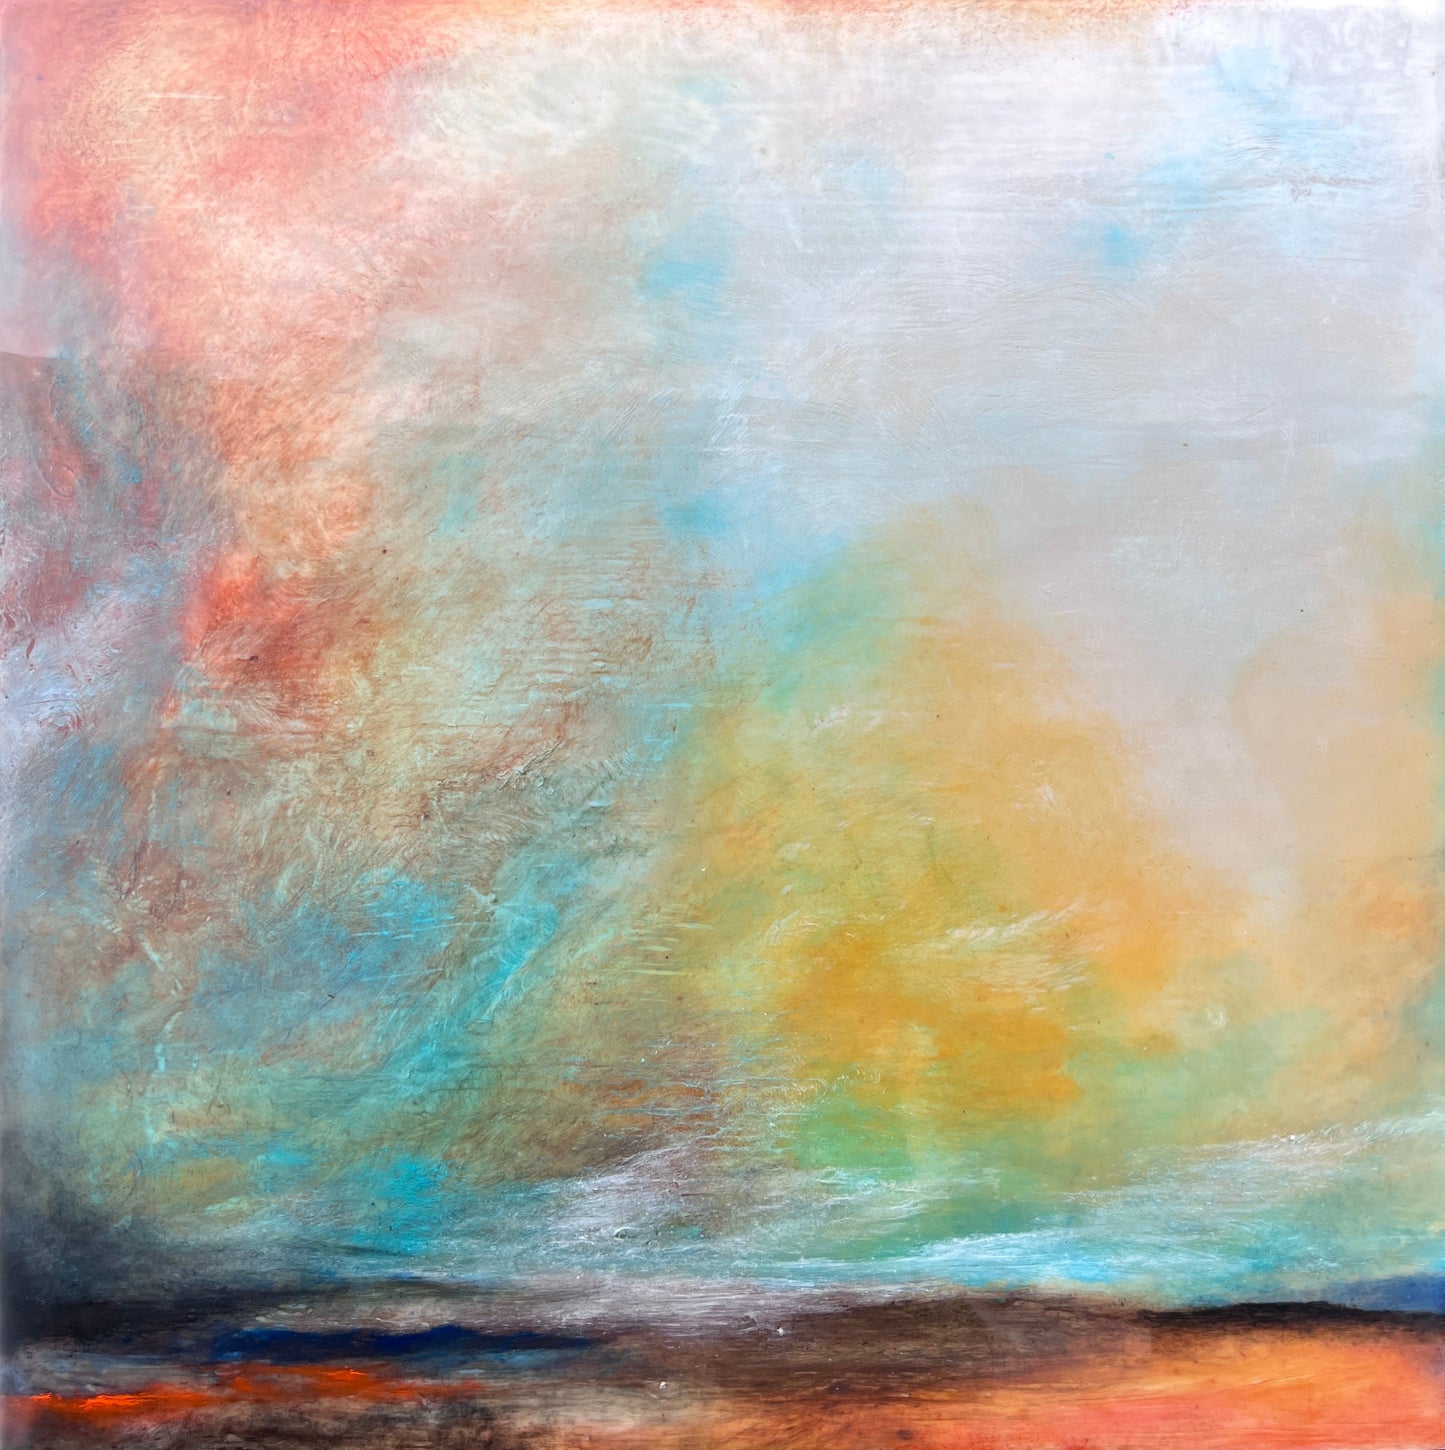 Abstract painting representing the sun rising over a landscape. The sky is nearly every color ranging from blue to pink. 12"x12" encaustic by Shannon Mello